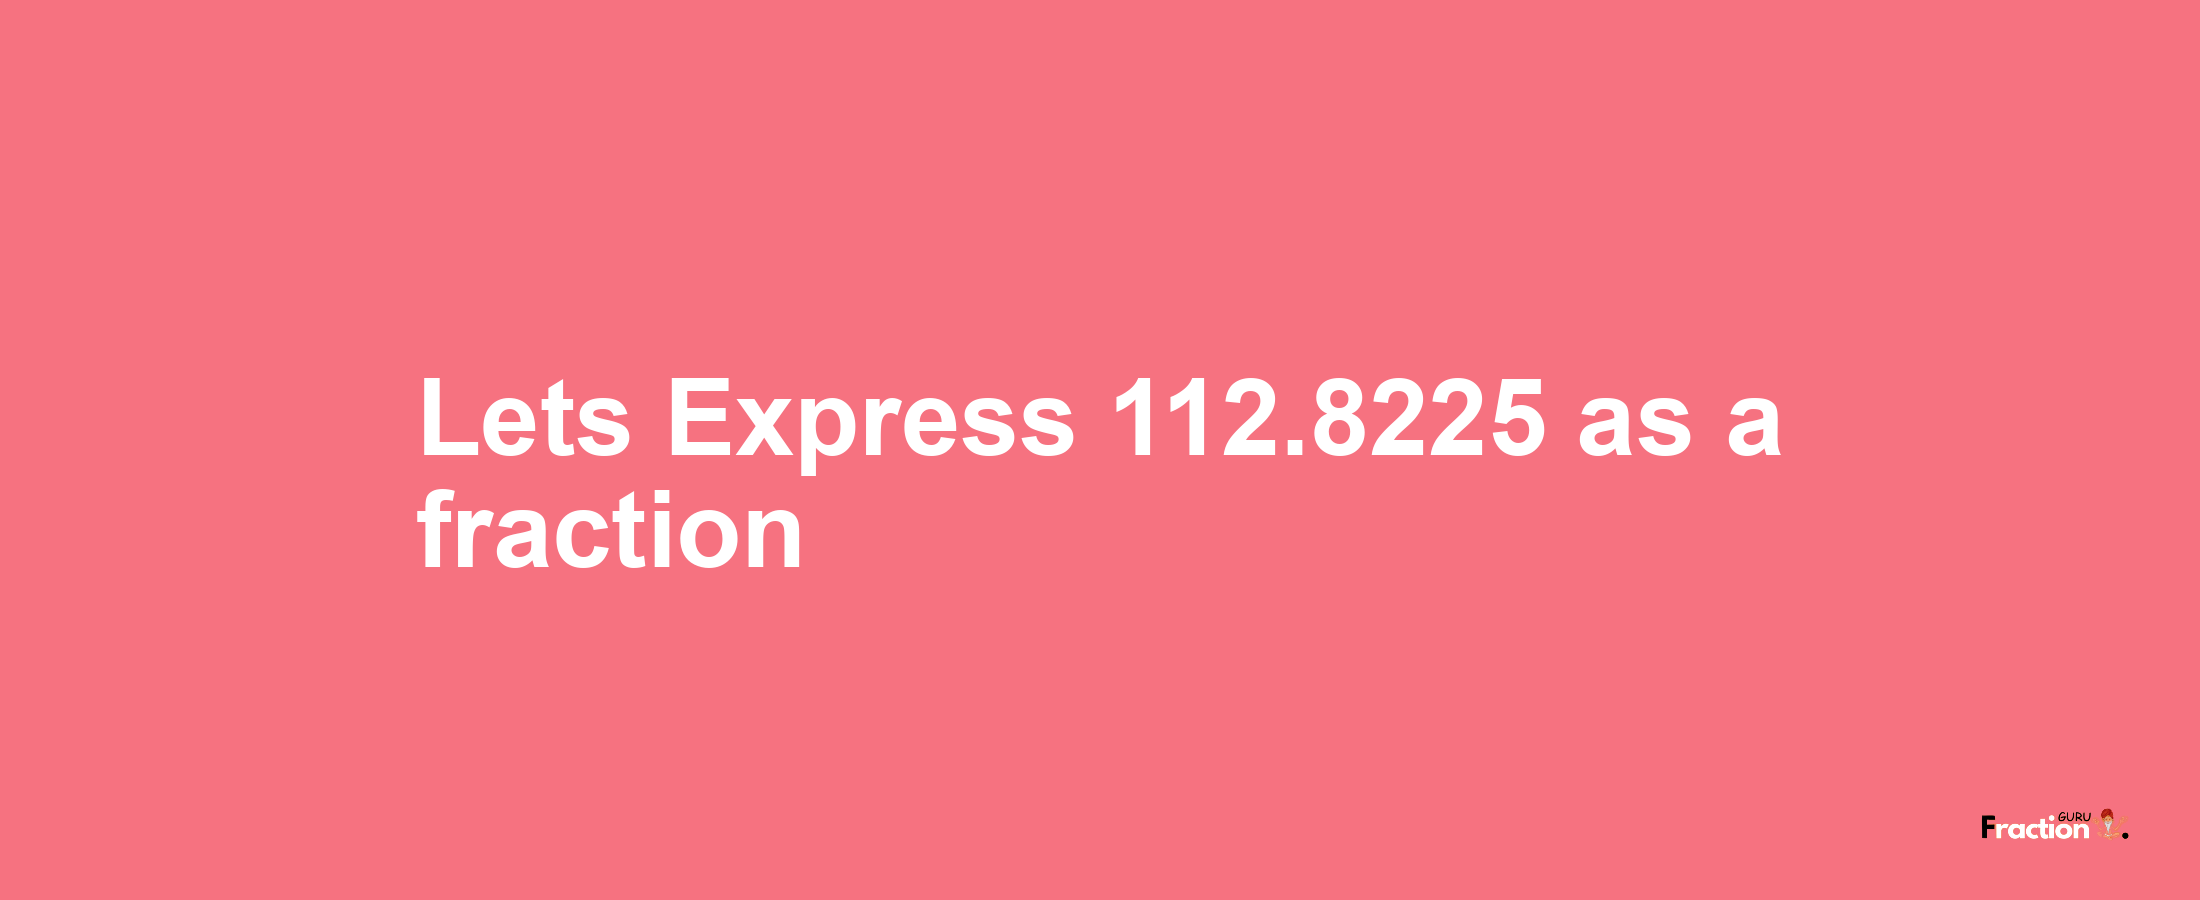 Lets Express 112.8225 as afraction